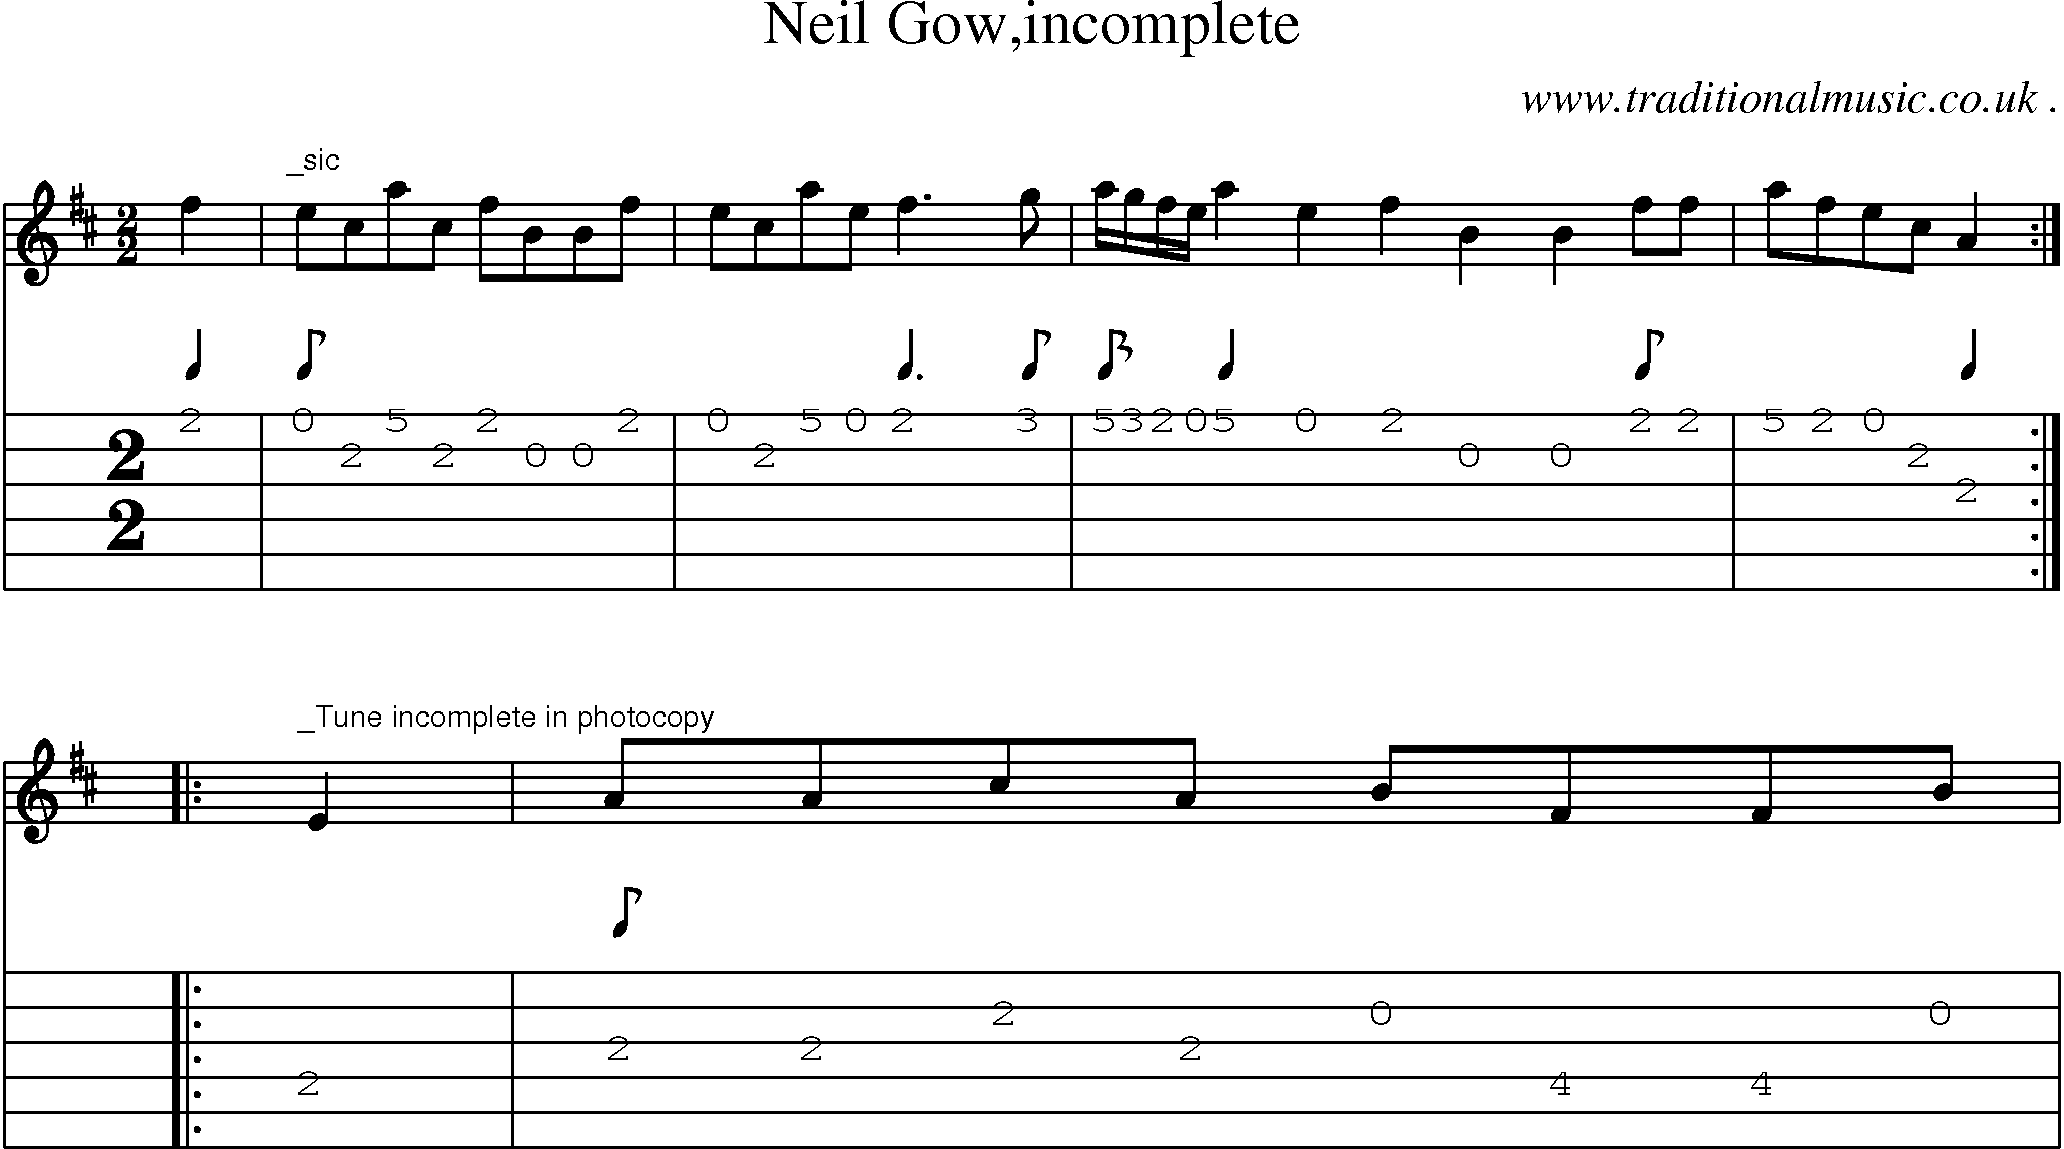 Sheet-Music and Guitar Tabs for Neil Gowincomplete